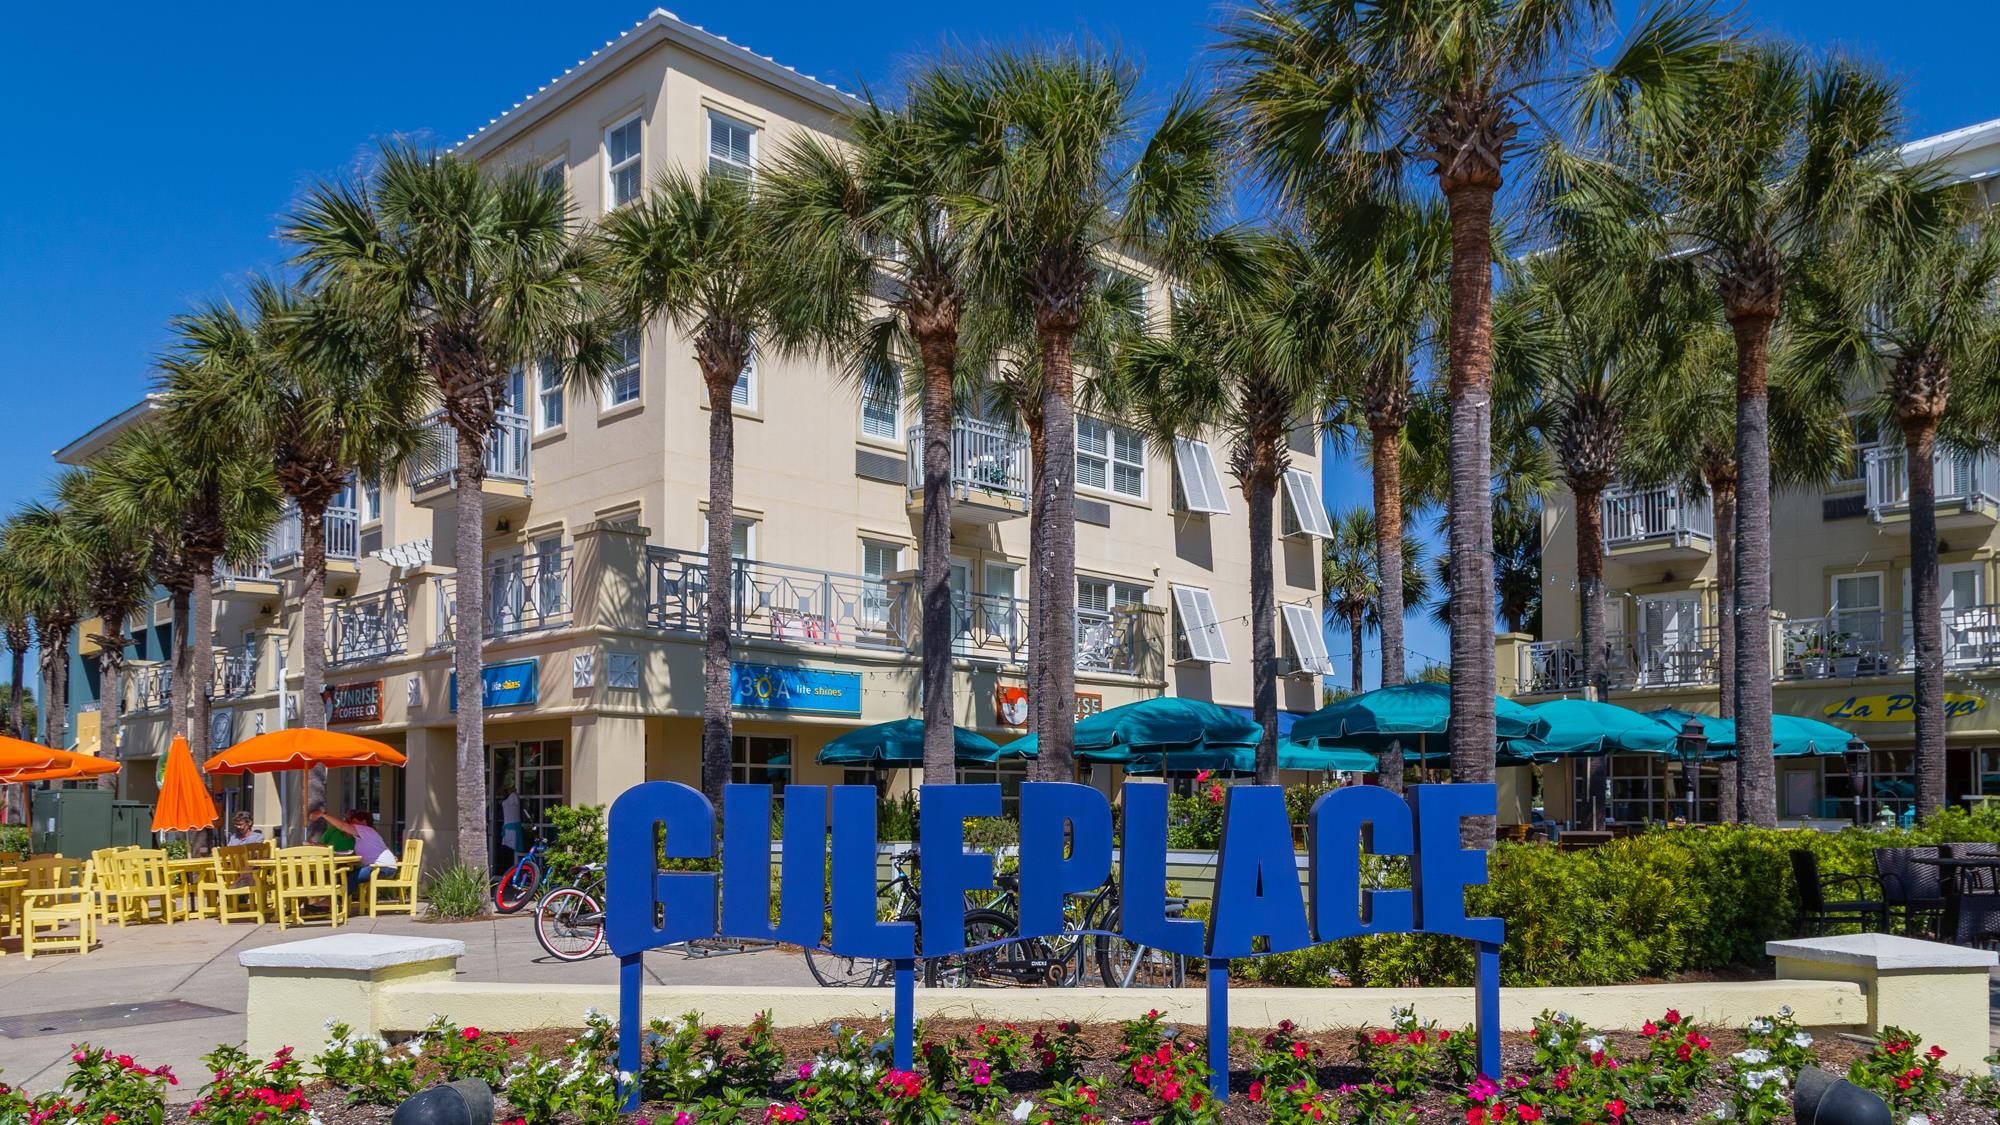 06_Gulf Place_20150420_120fused